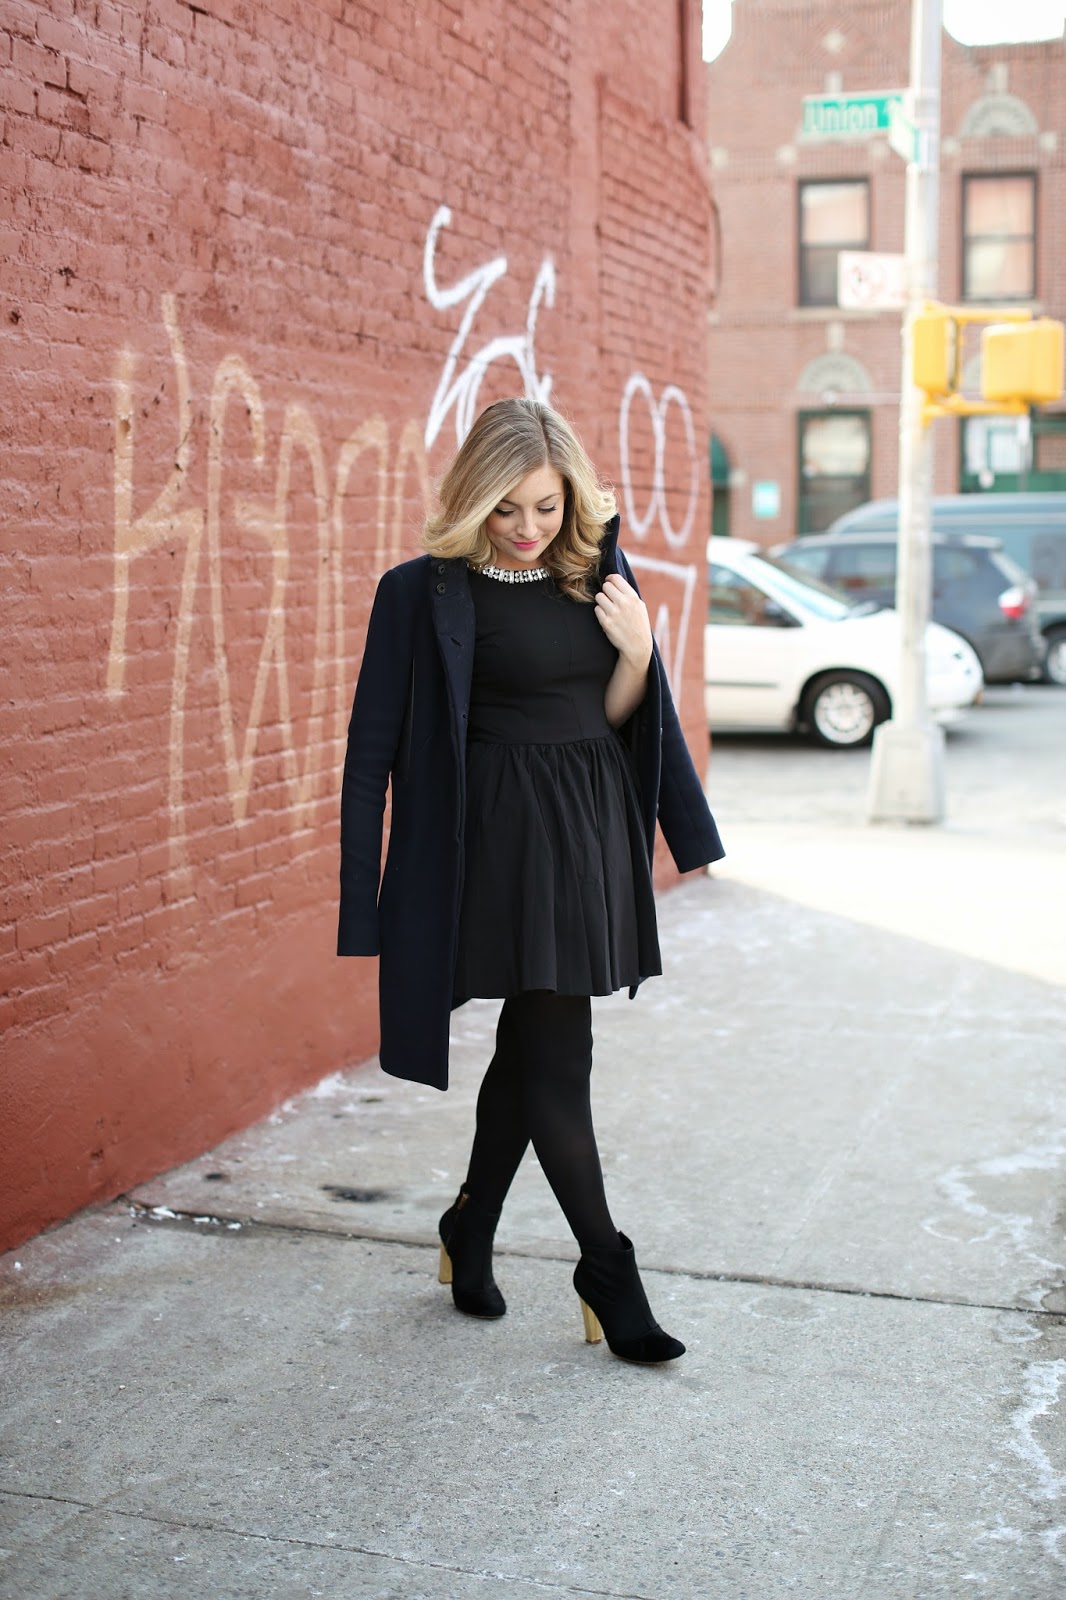 A New spin on the little black dress - Rach Martino